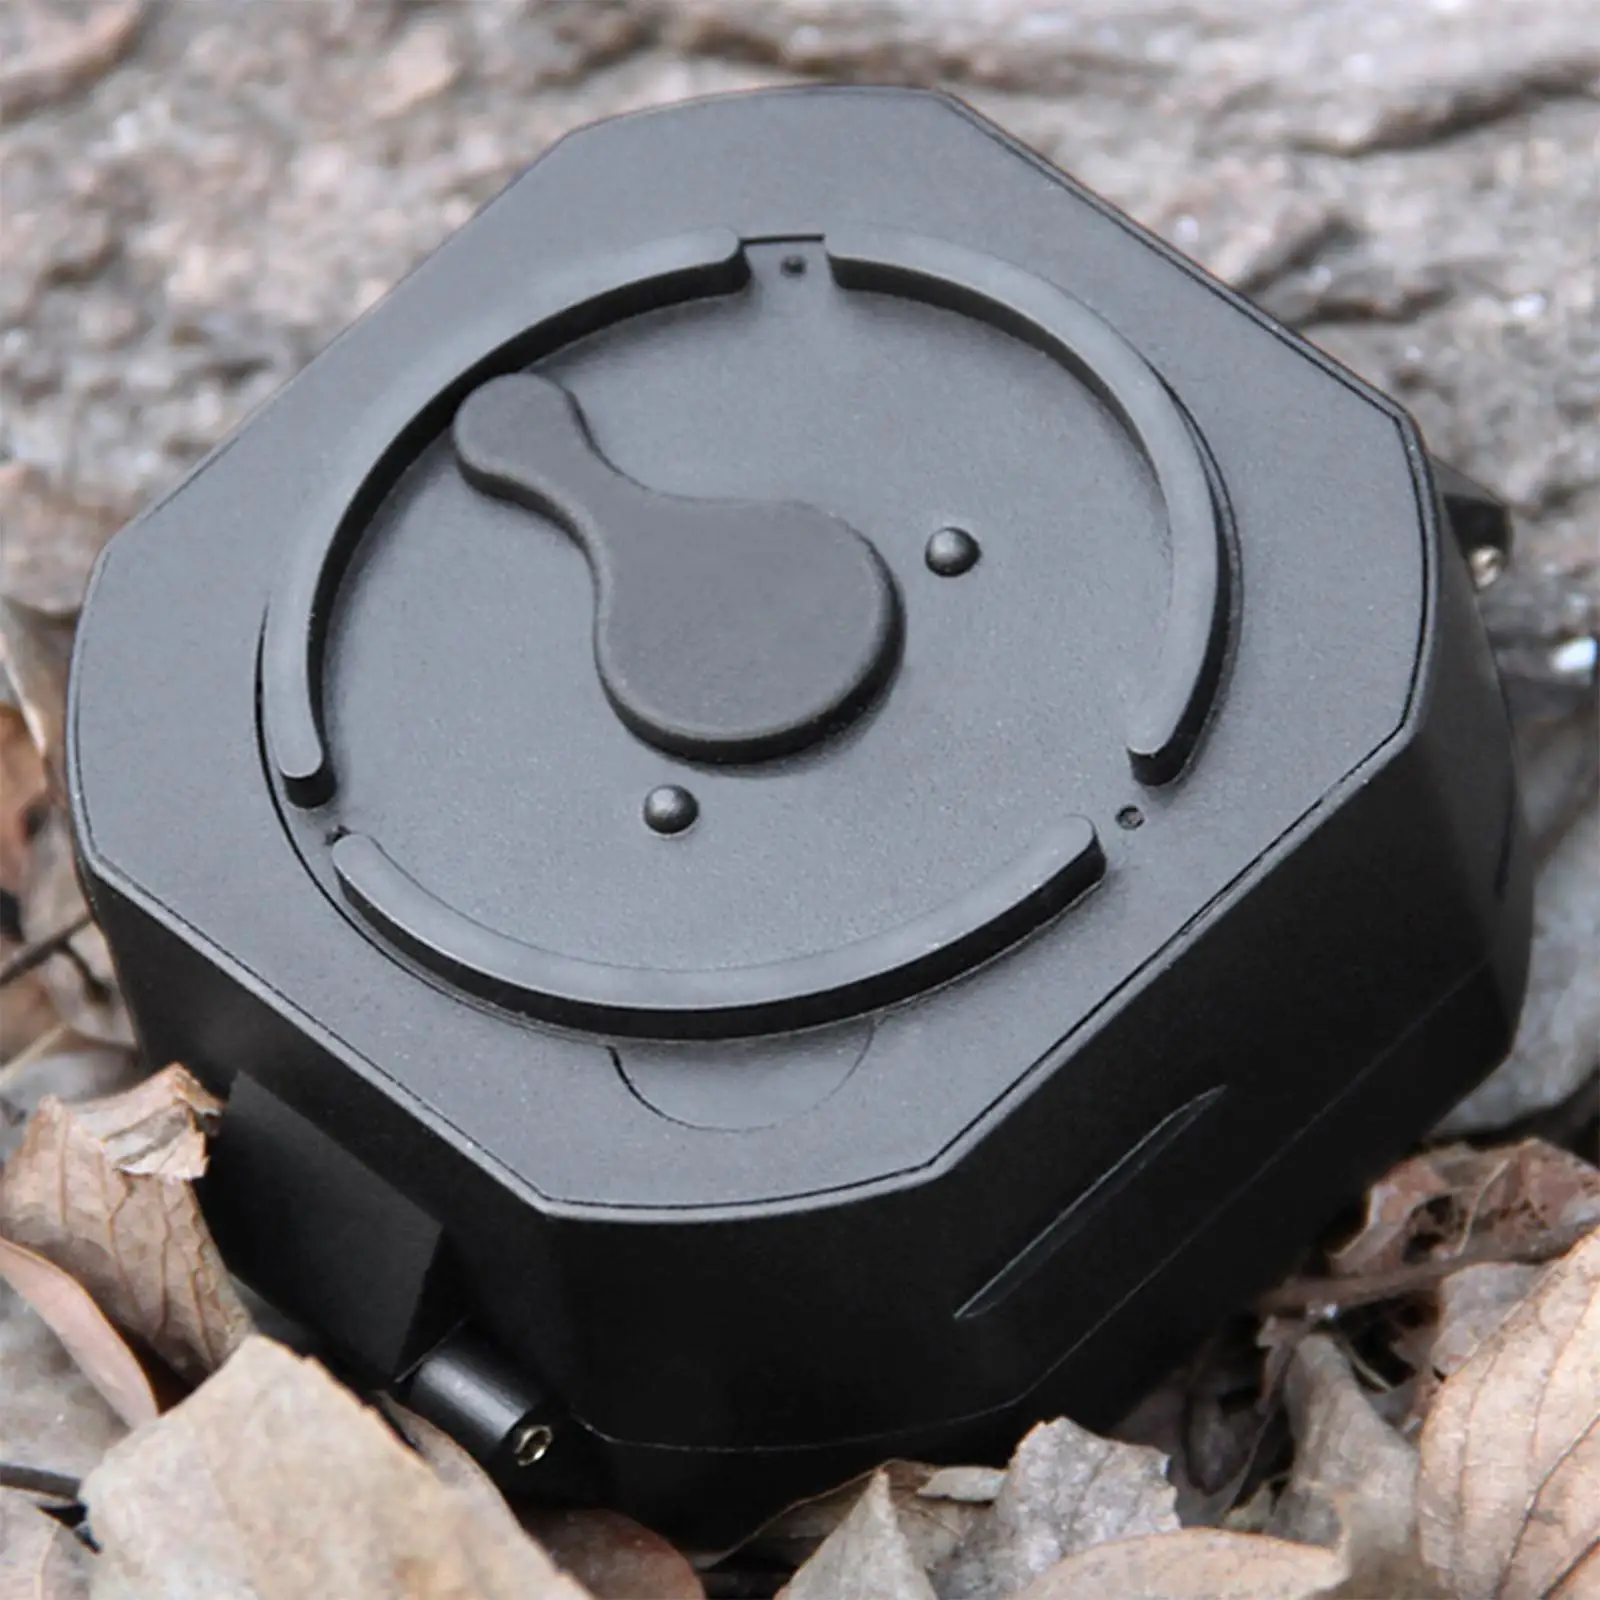 Portable Geology Compass Sighting Lensatic Compass Lightweigh Accuracy for Survival Camping Backpacking Foresters Hiking Devices